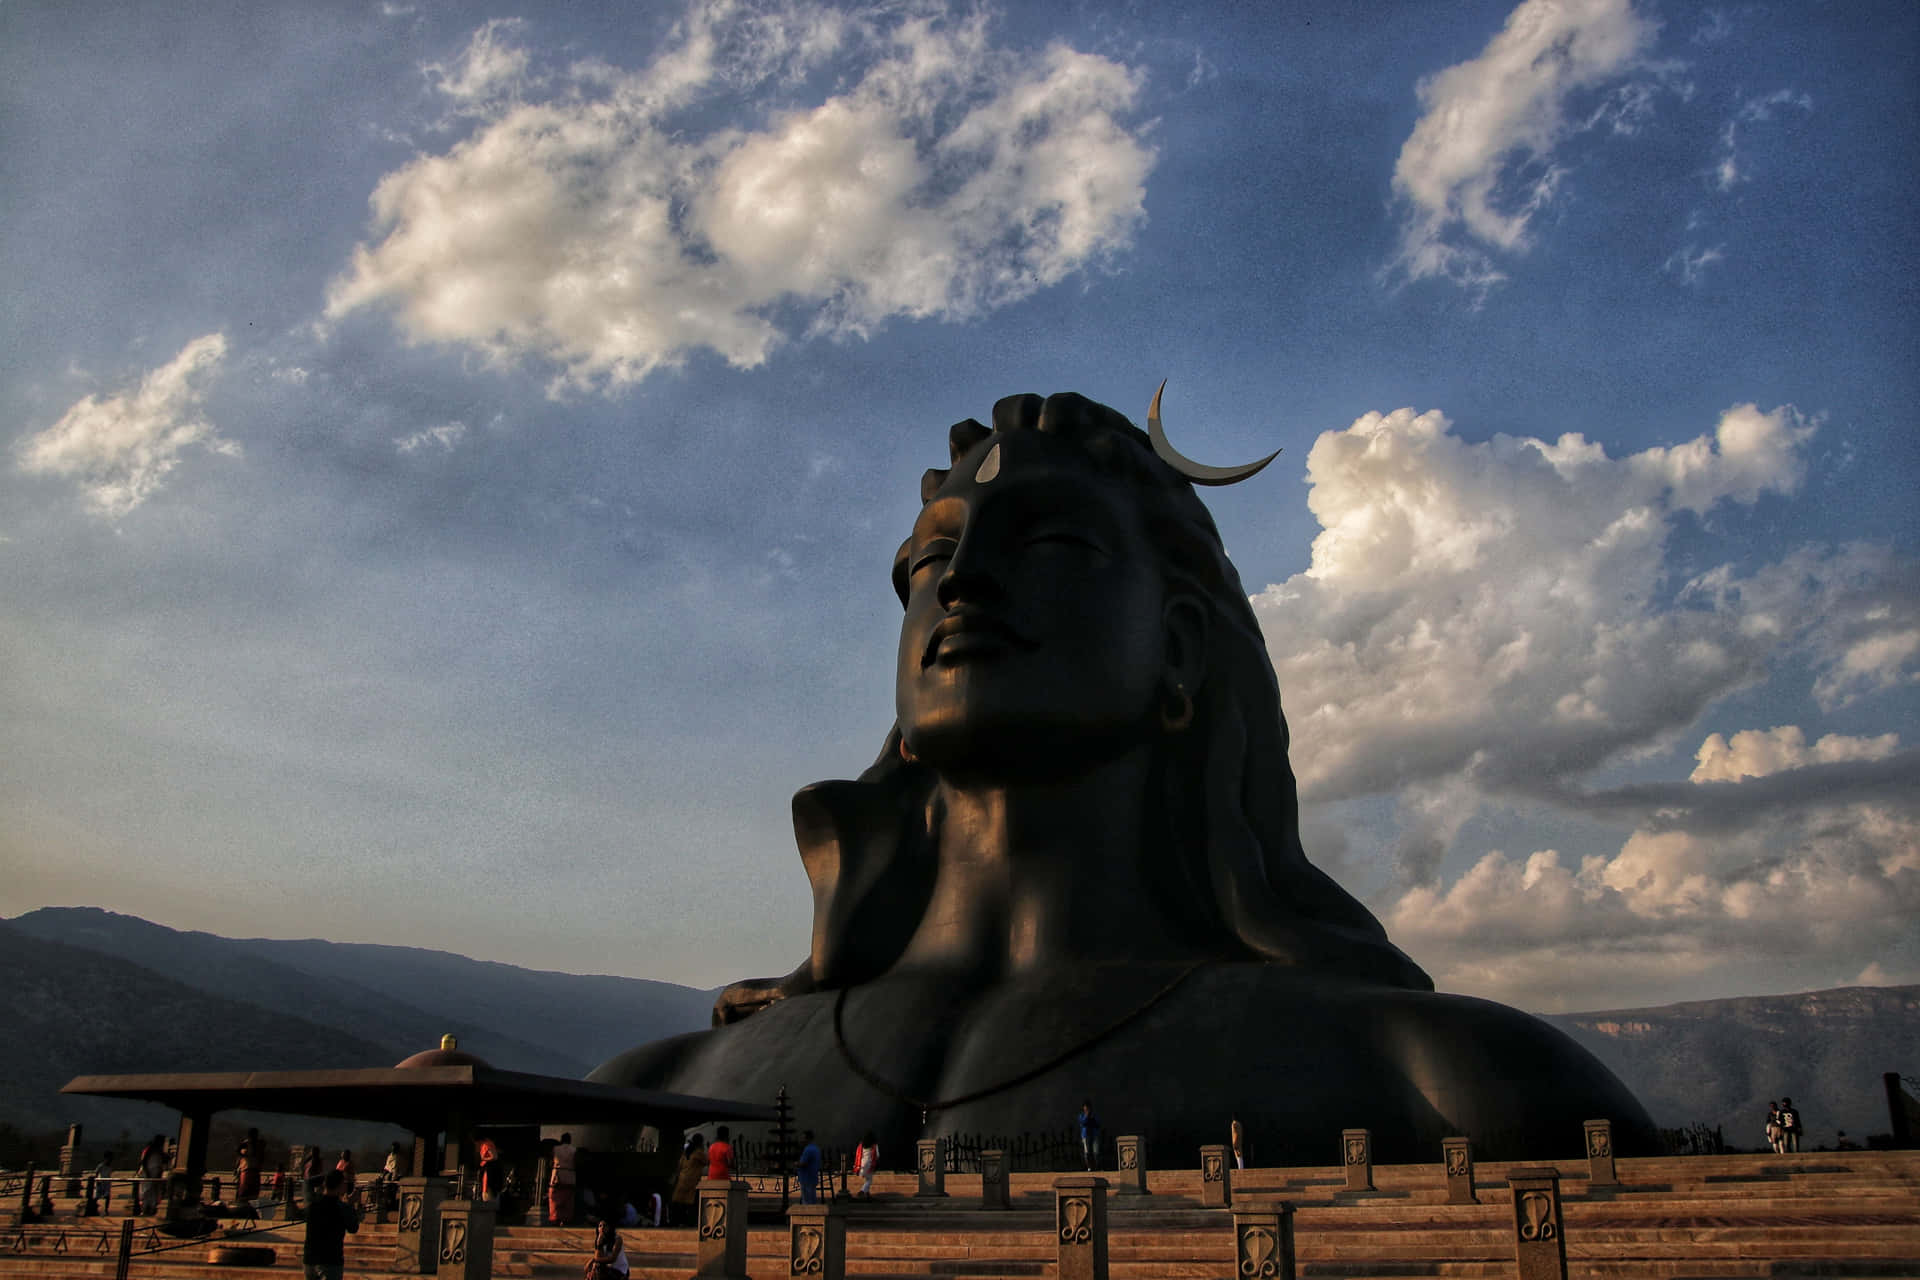 A Large Statue Of Lord Shiva In The Mountains